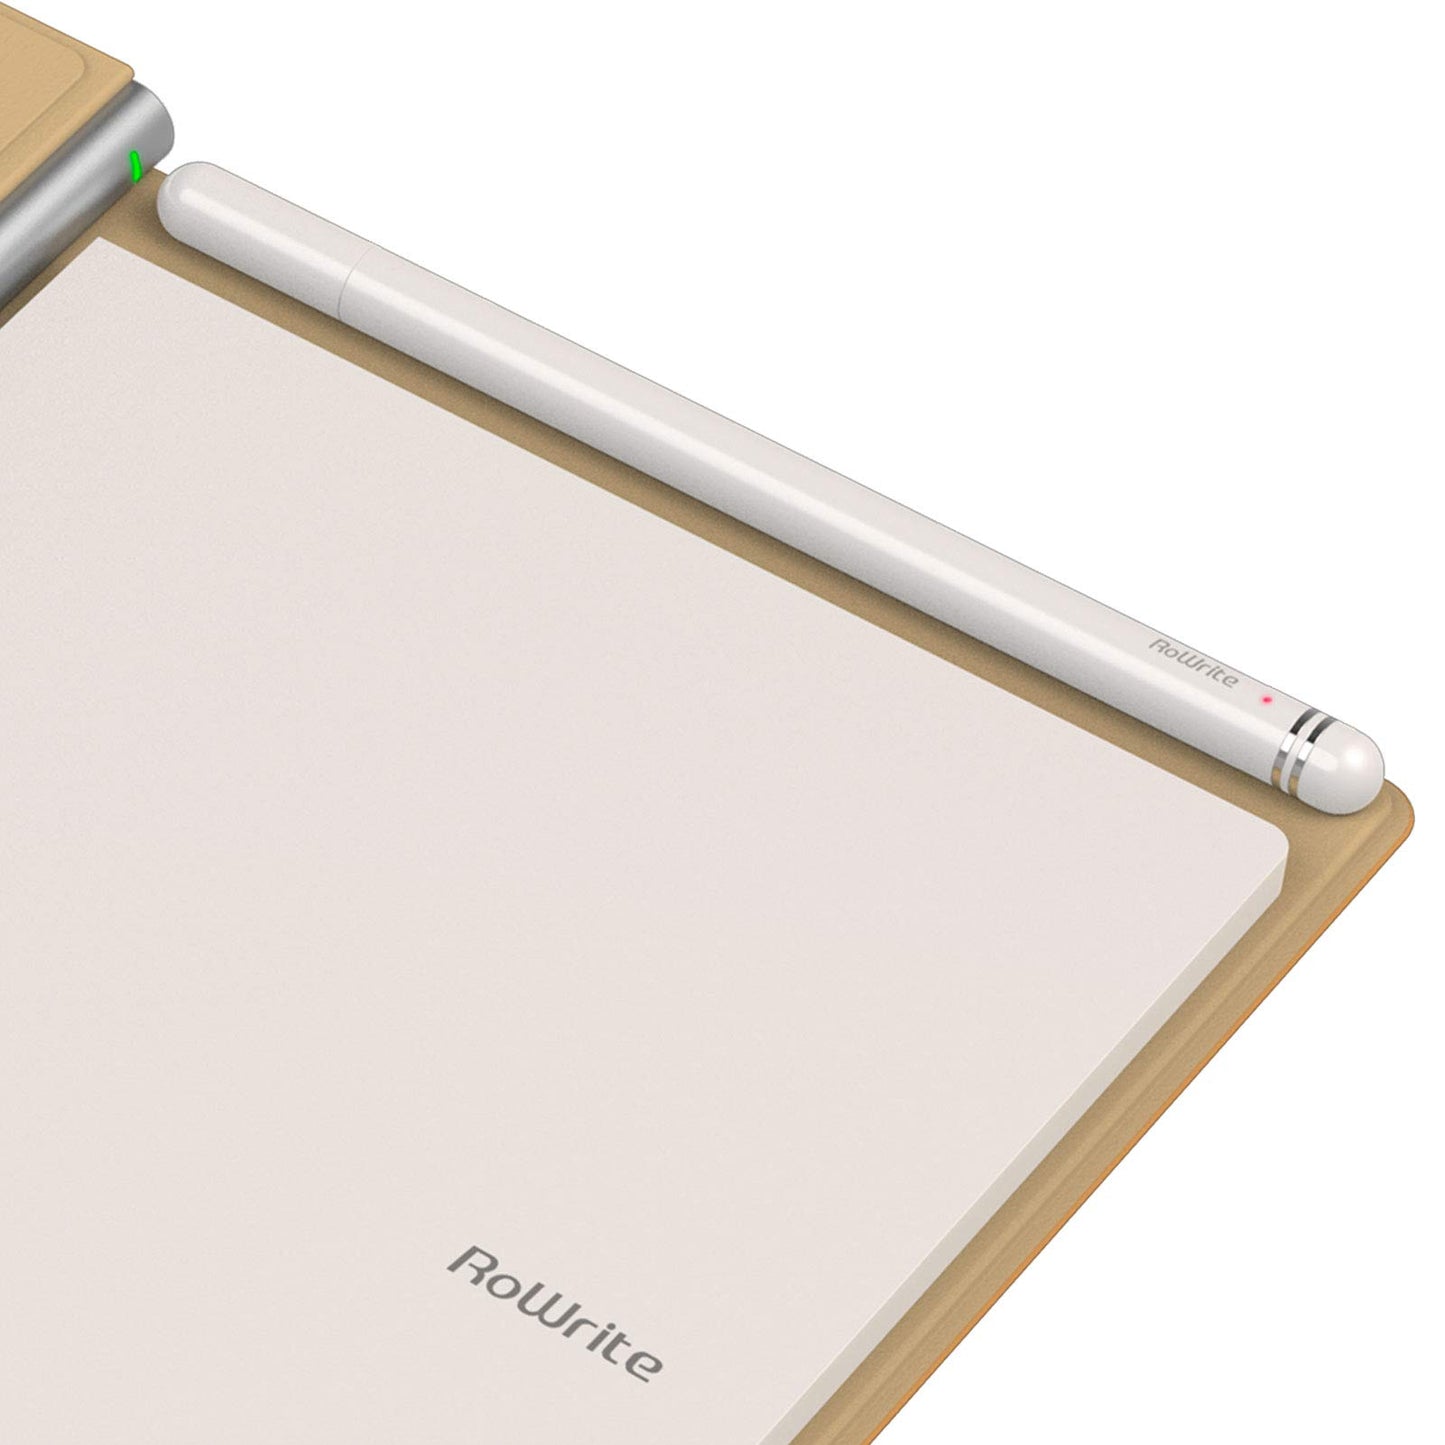 RoWrite 2 Smart Writing Paper and Pen